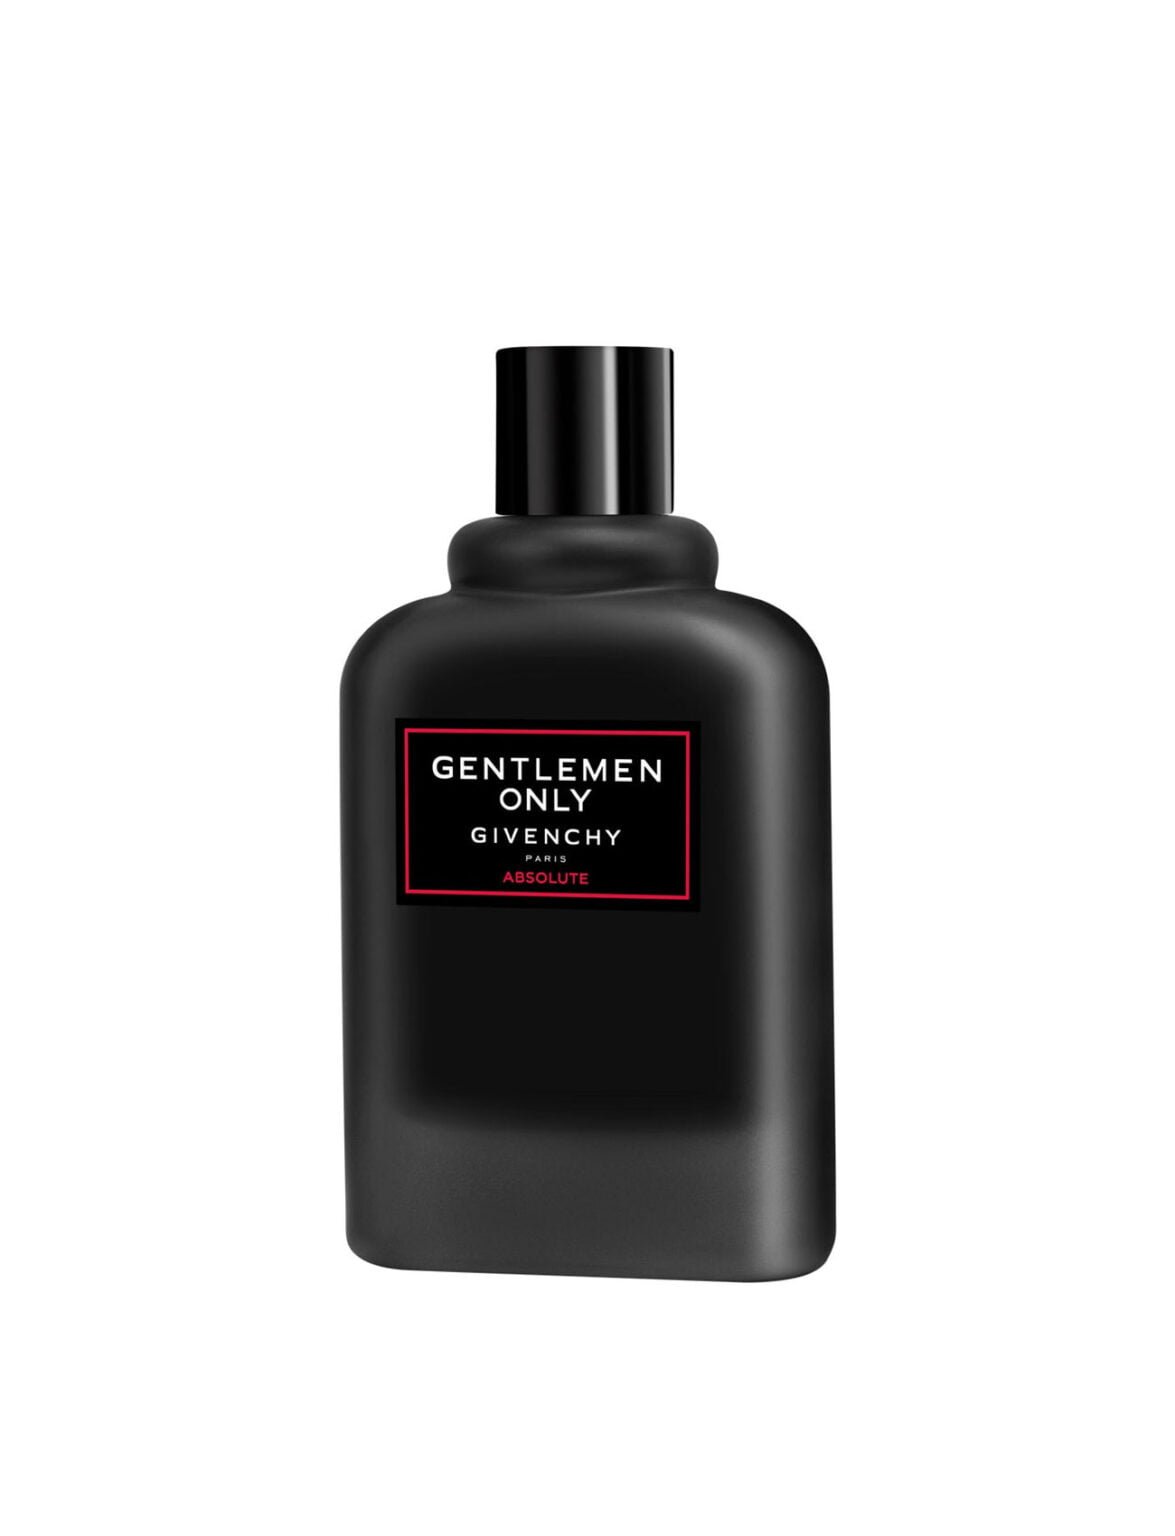 Gentlemen Only Absolute by Givenchy- LuxEssentials - Online Store